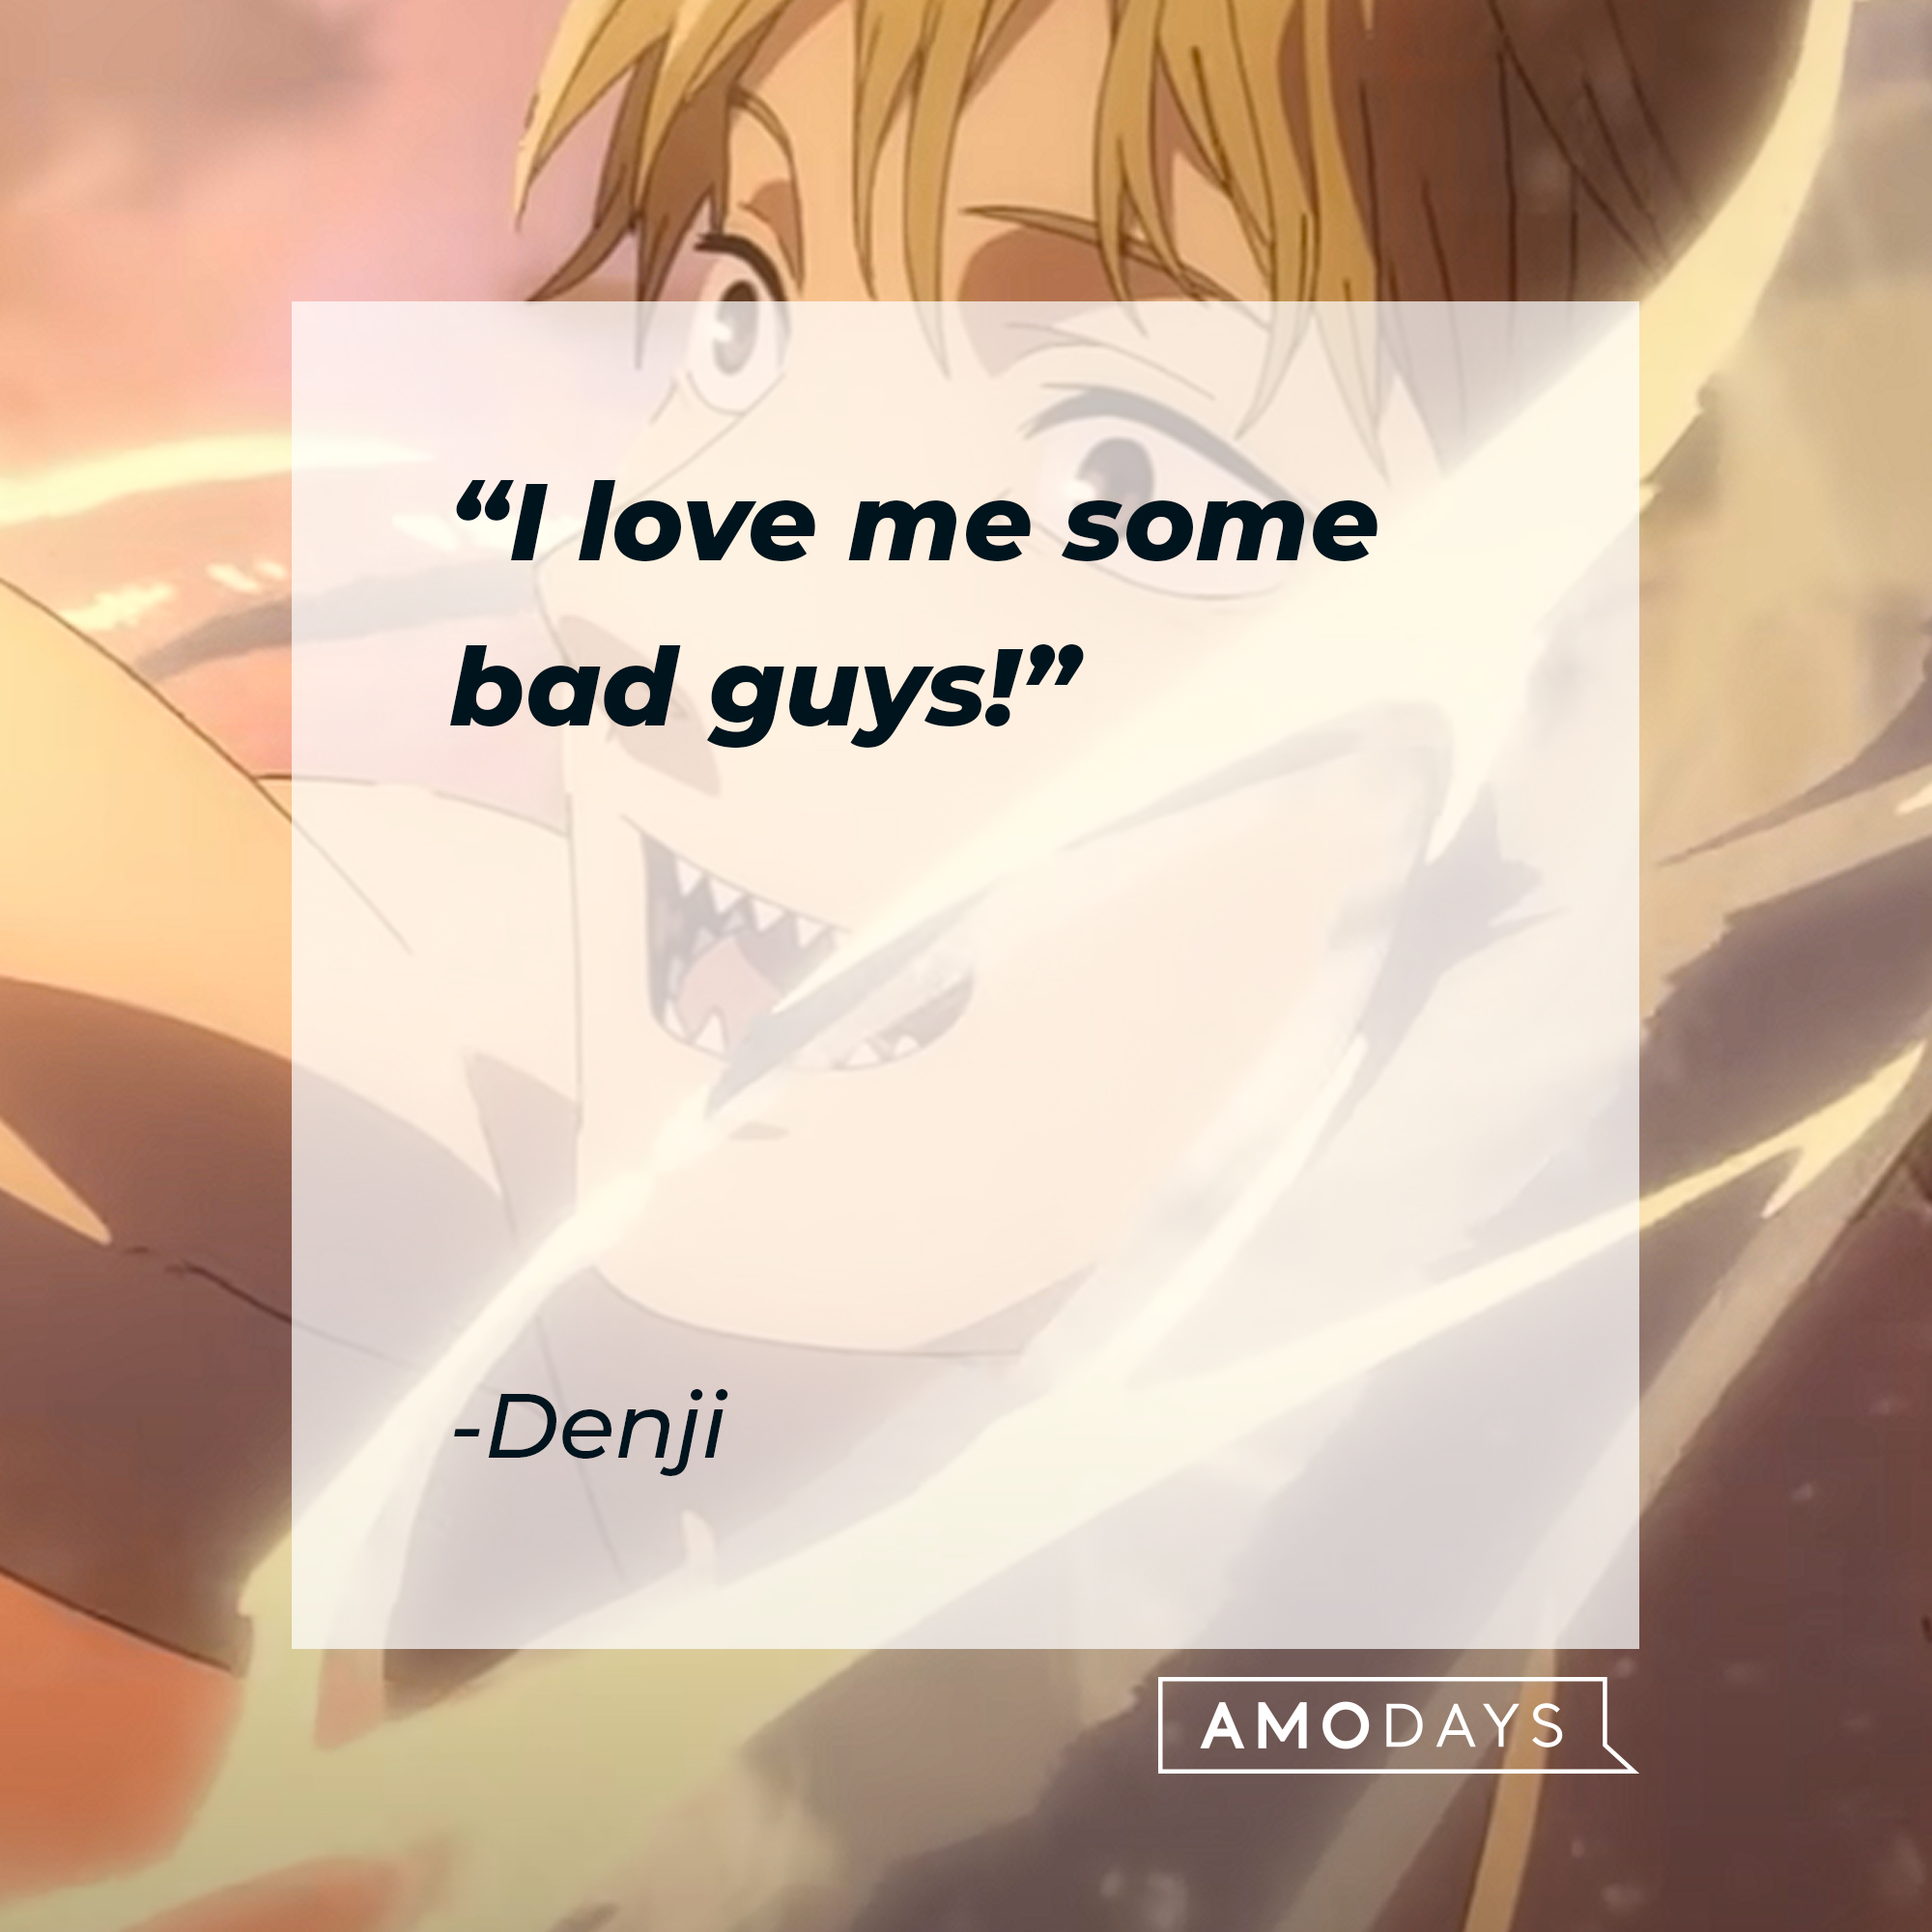 An image of Denji with his quote: “I love me some bad guys!” | Source: youtube.com/CrunchyrollCollection